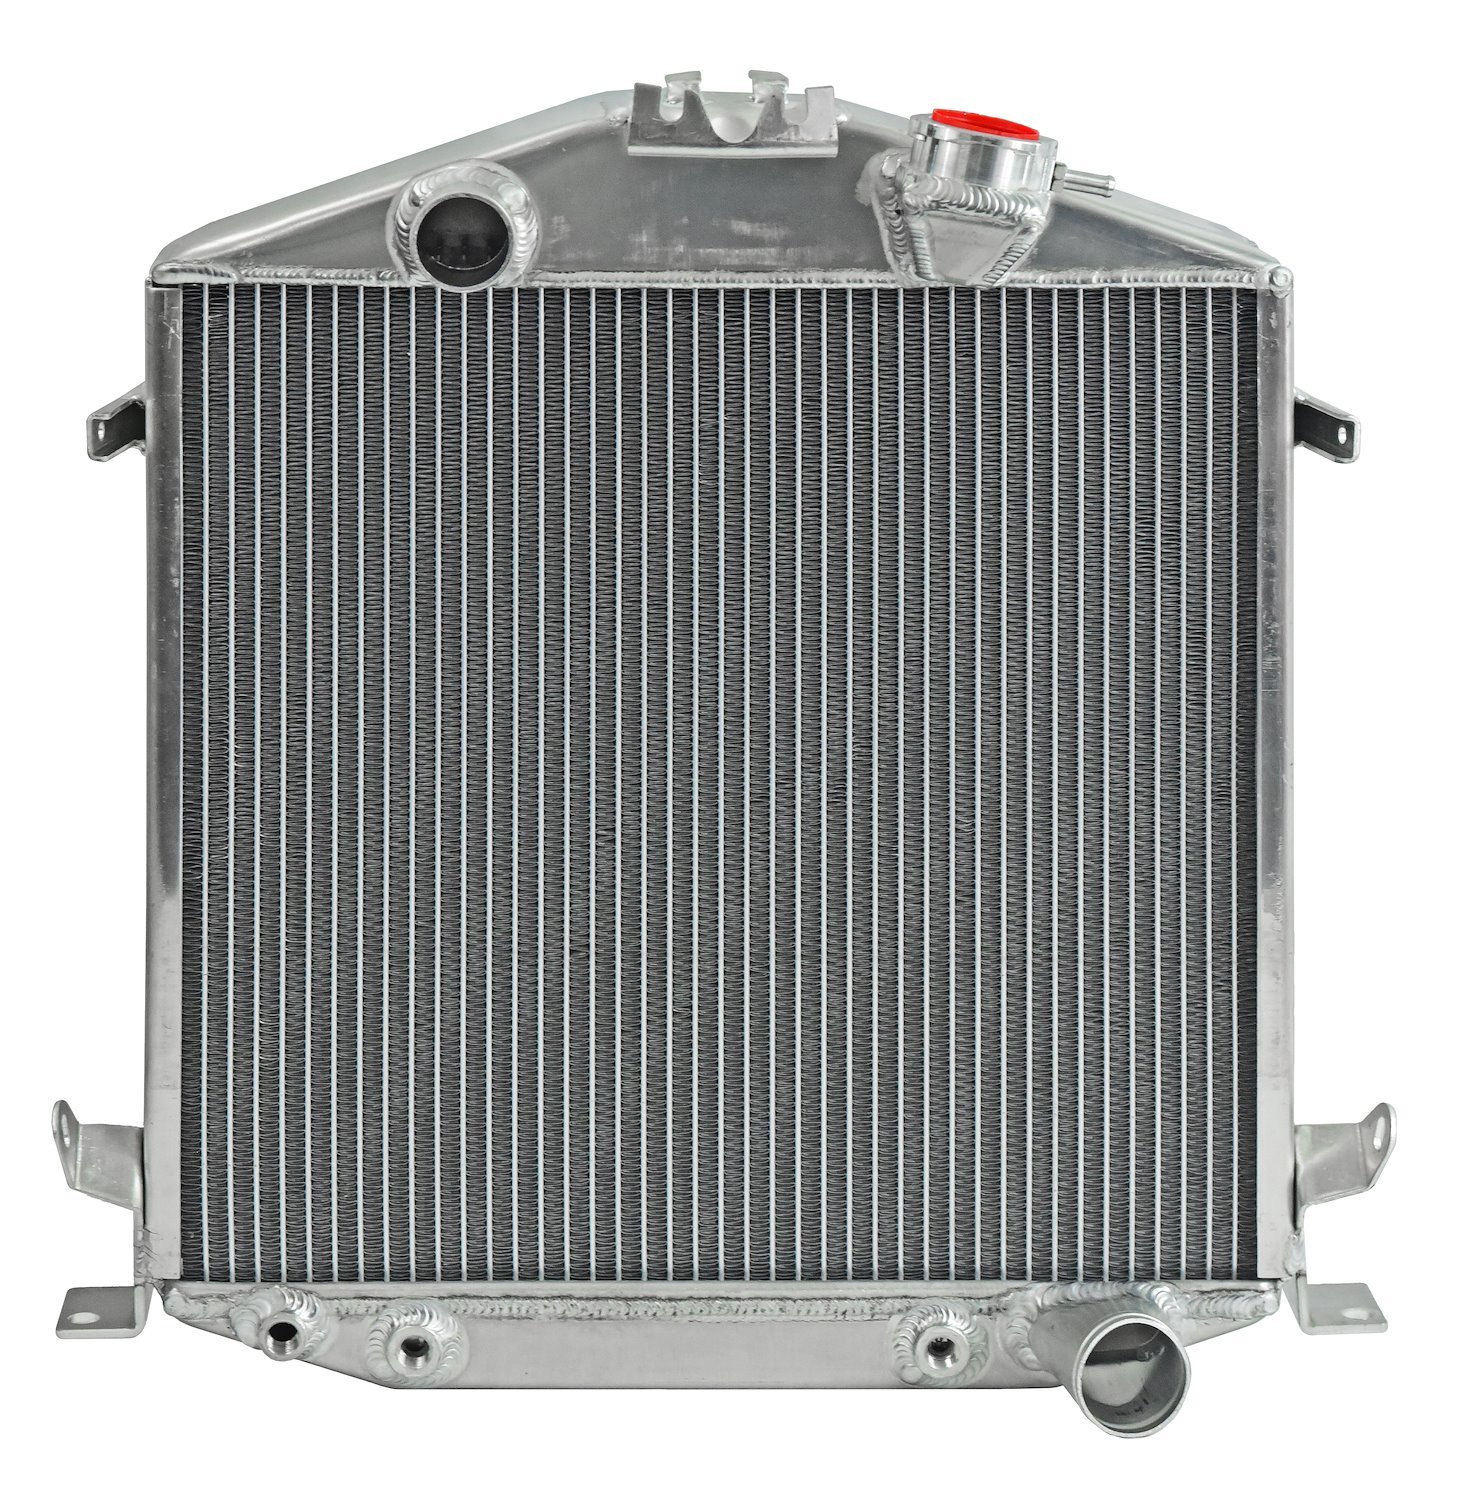 Aluminum Radiator for 1928-1931 Ford Model A with Chevy V8 Engine & Chopped Grill